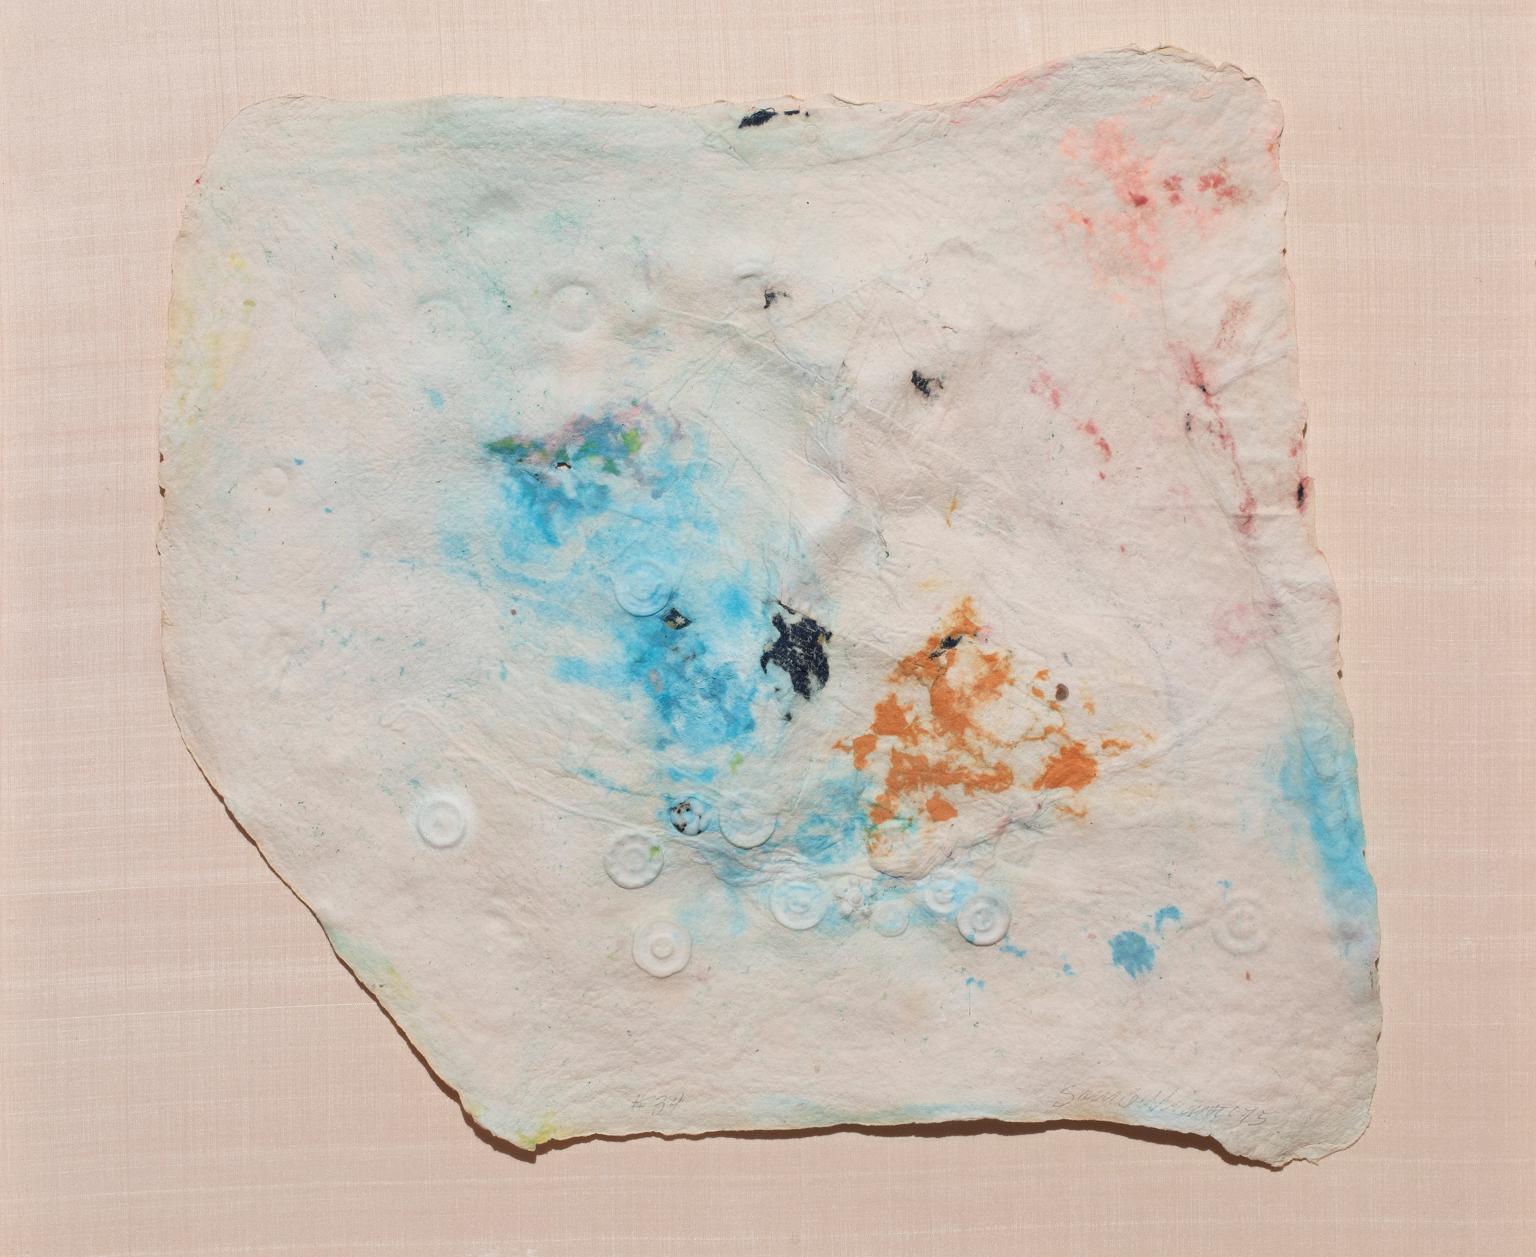 SALE ONE WEEK ONLY

“Untitled #34” was created by Sam Gilliam, one of the great innovators in postwar American painting. It is dated and signed on the lower front. The thick handmade paper is rich with folds and texture and the colors lively. In